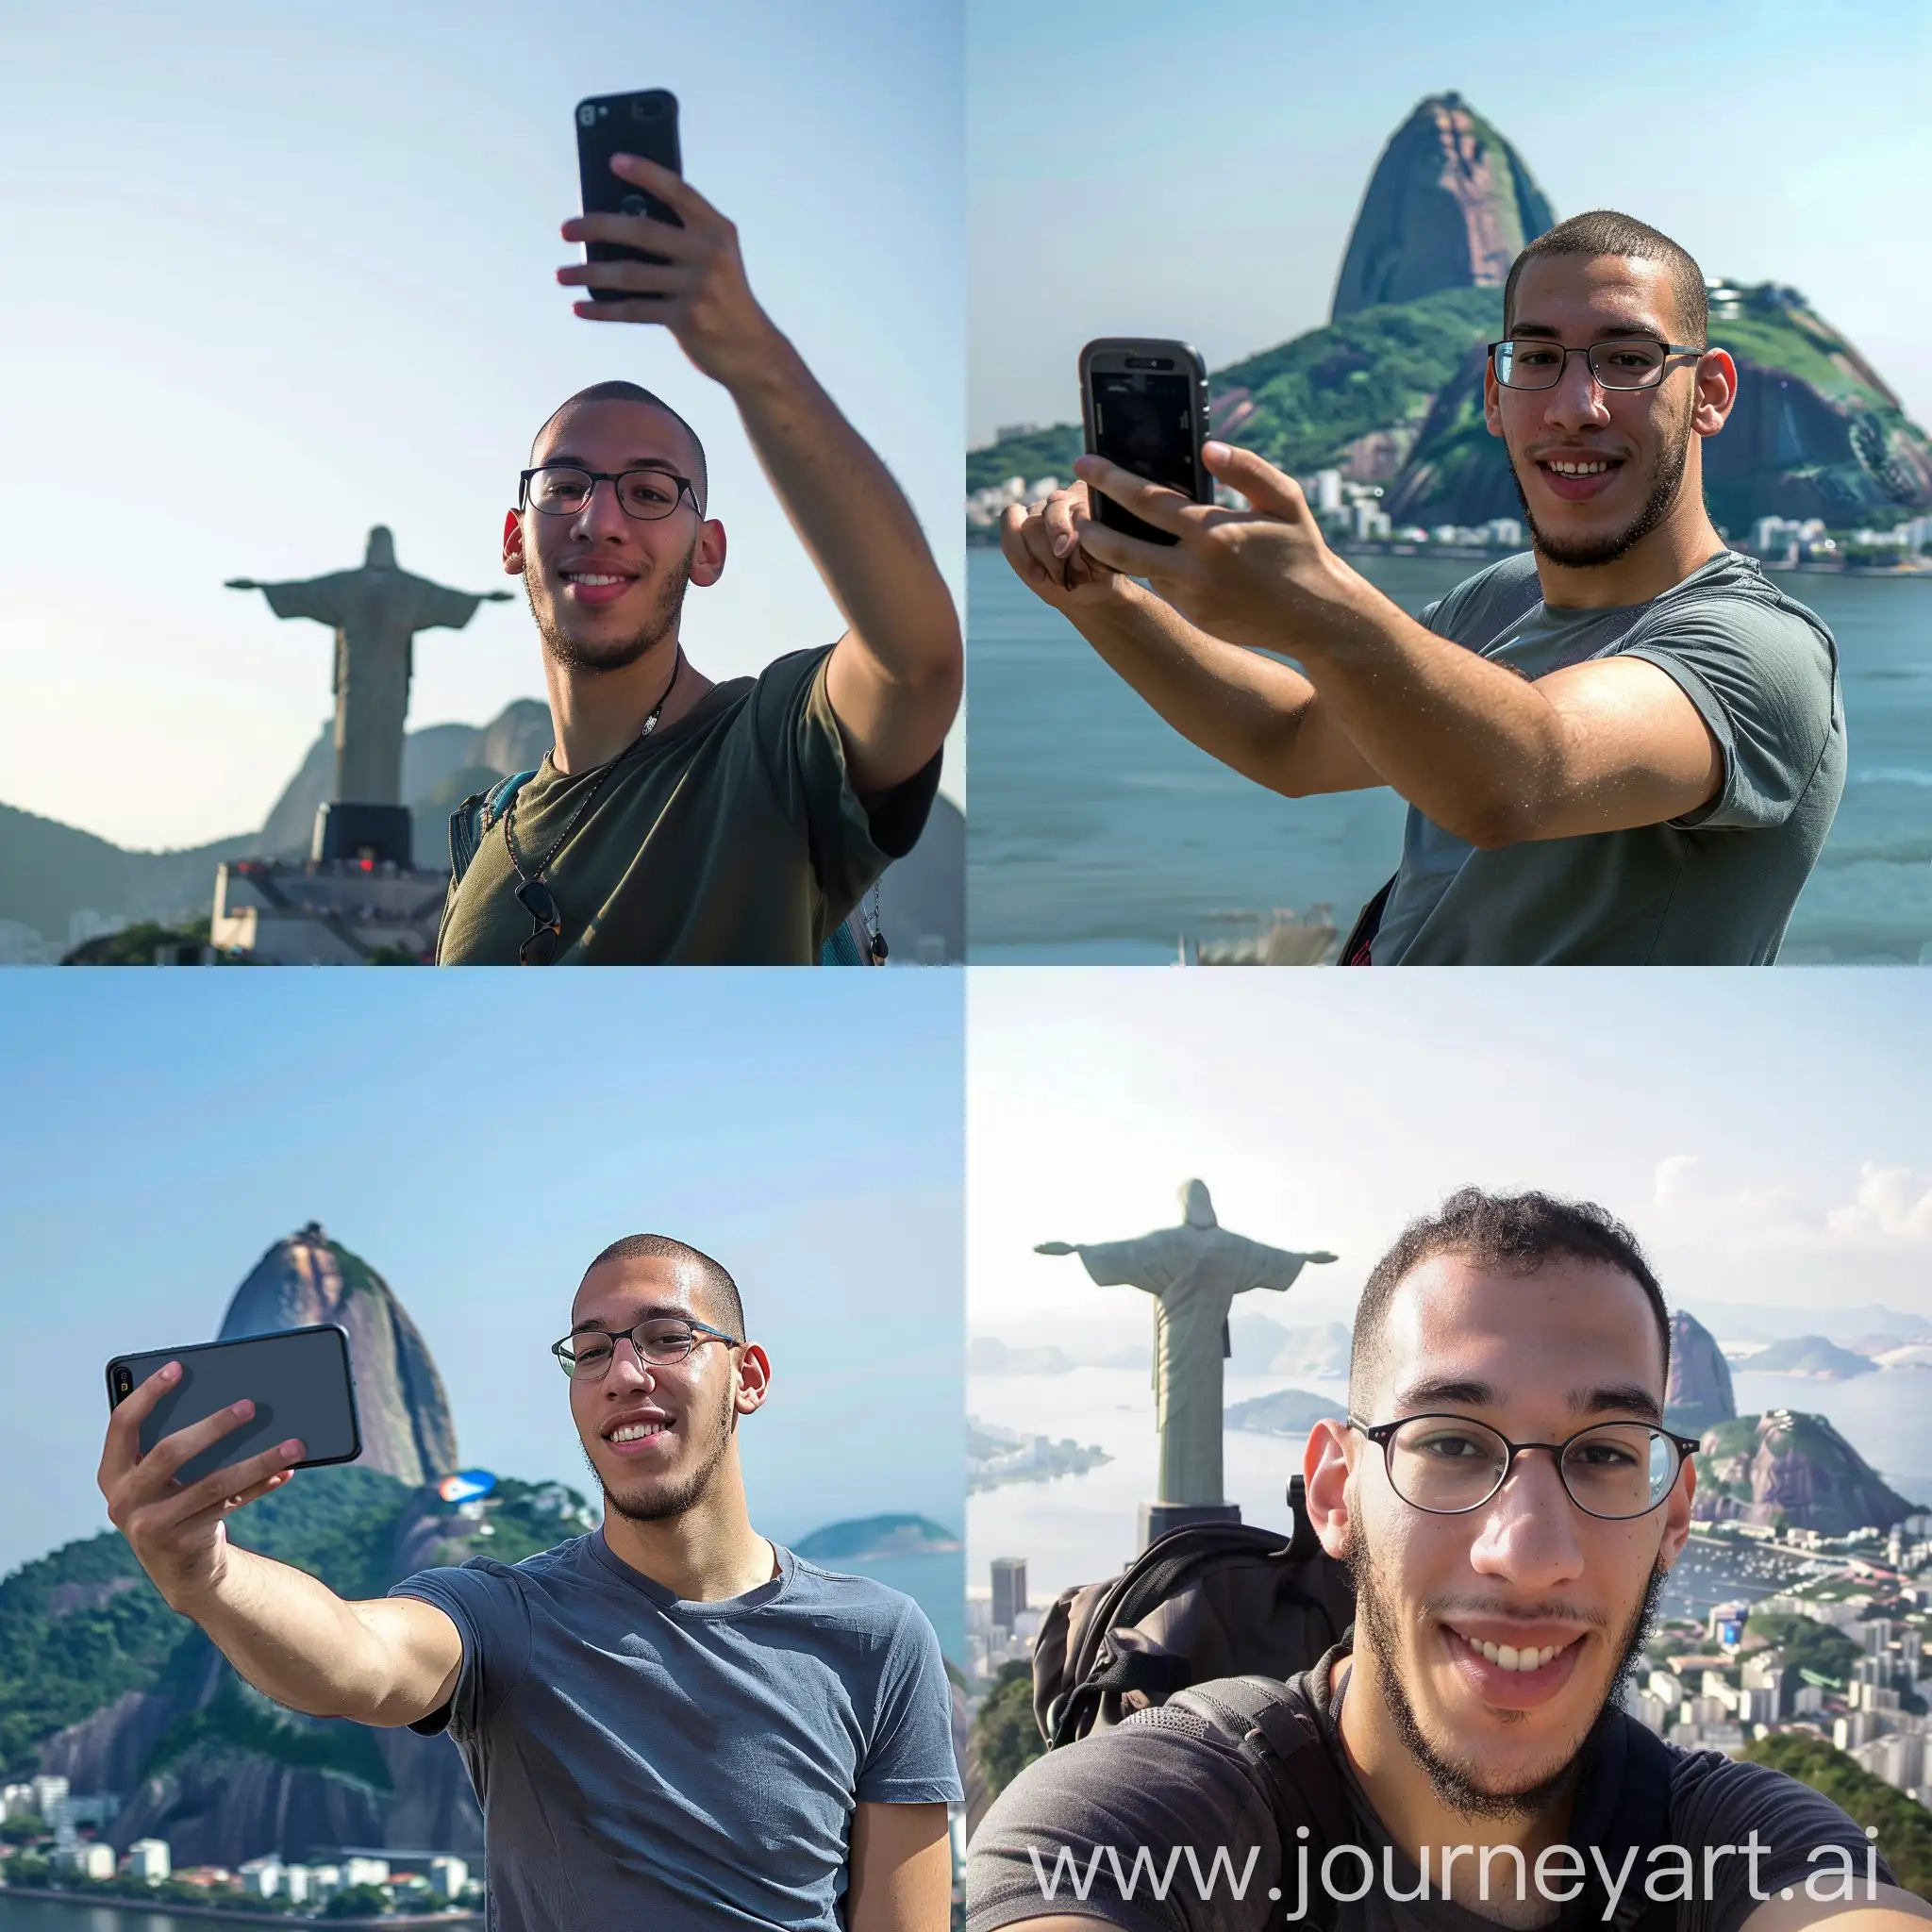 a 24 year old man taking a selfie in Rio de Janeiro, Christ the Redeemer in the background --cref https://i.pinimg.com/736x/16/09/8b/16098befbca2b28de02529b69c4a1e8e.jpg --cw 0